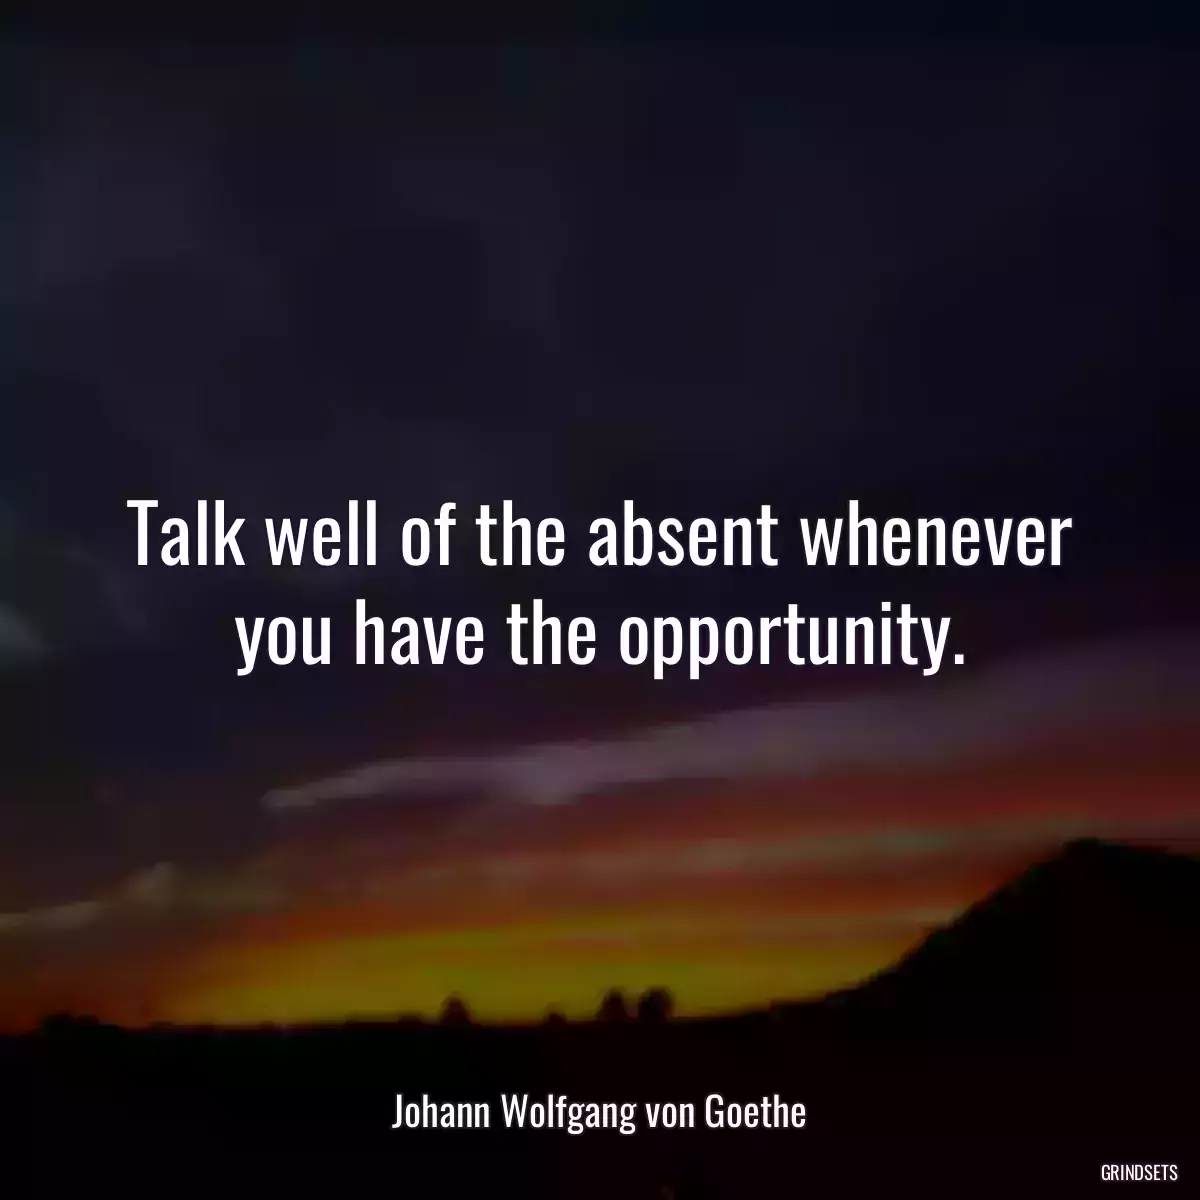 Talk well of the absent whenever you have the opportunity.